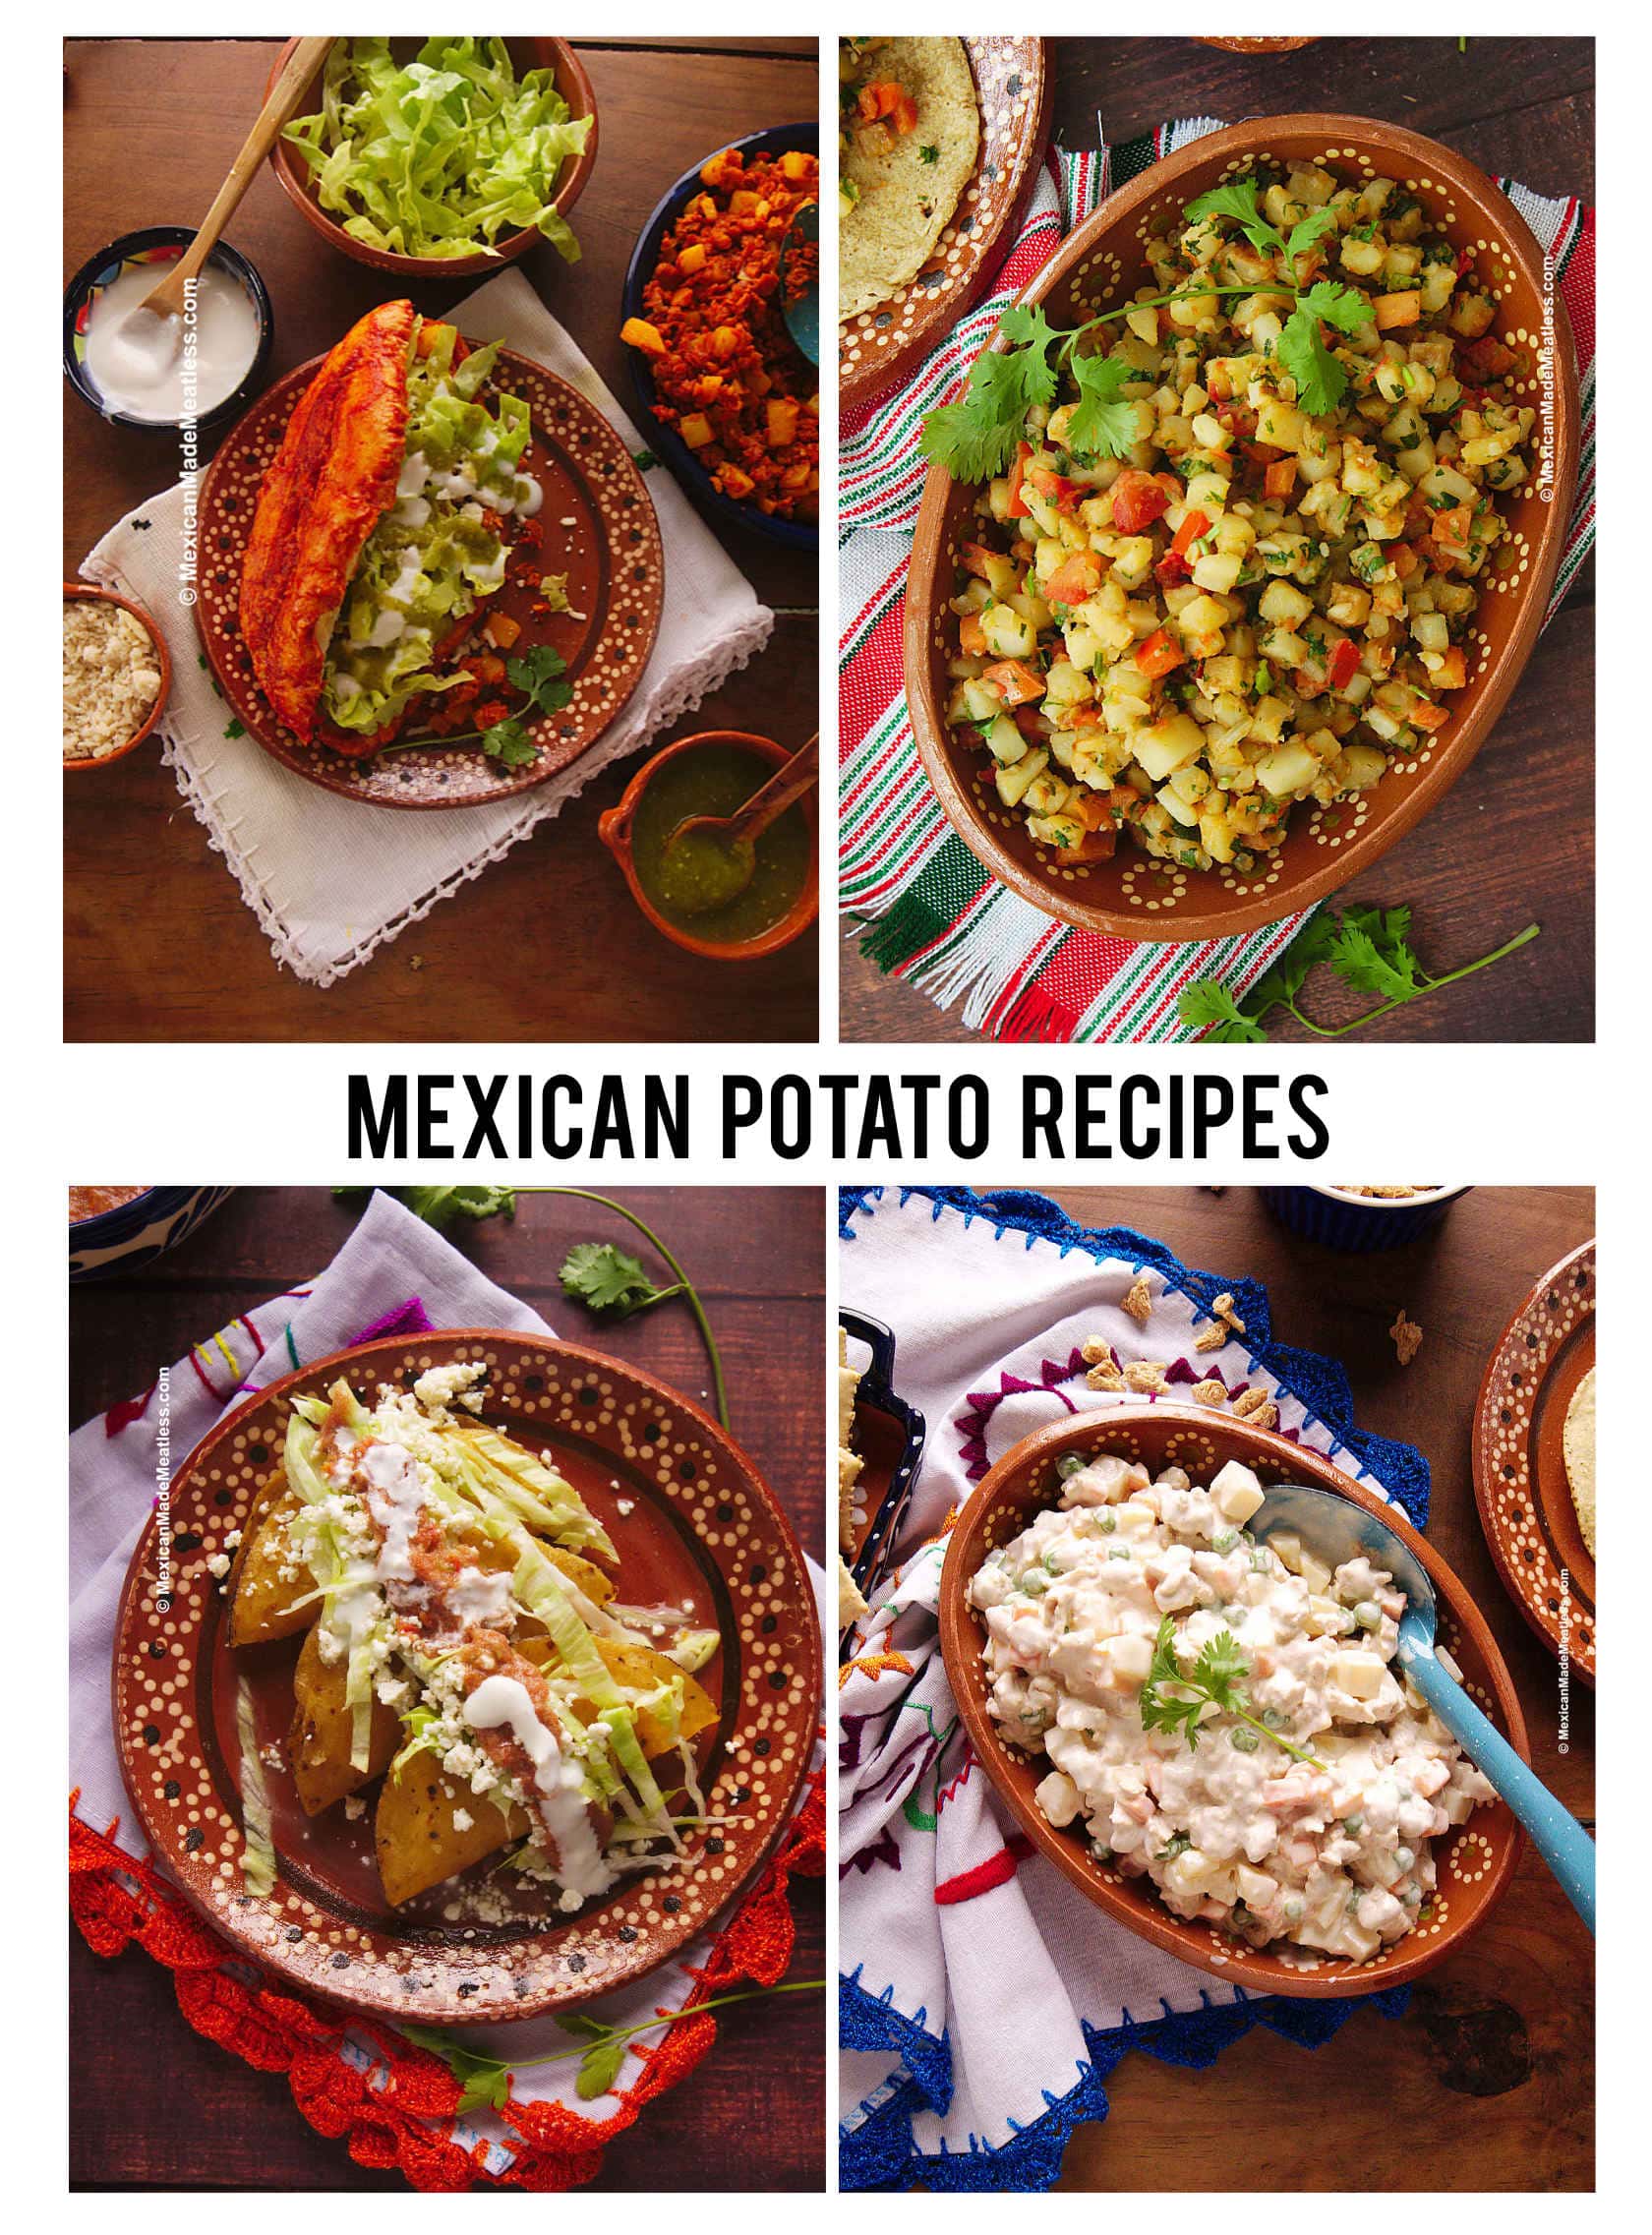 18 Authentic Mexican Recipes with Potatoes